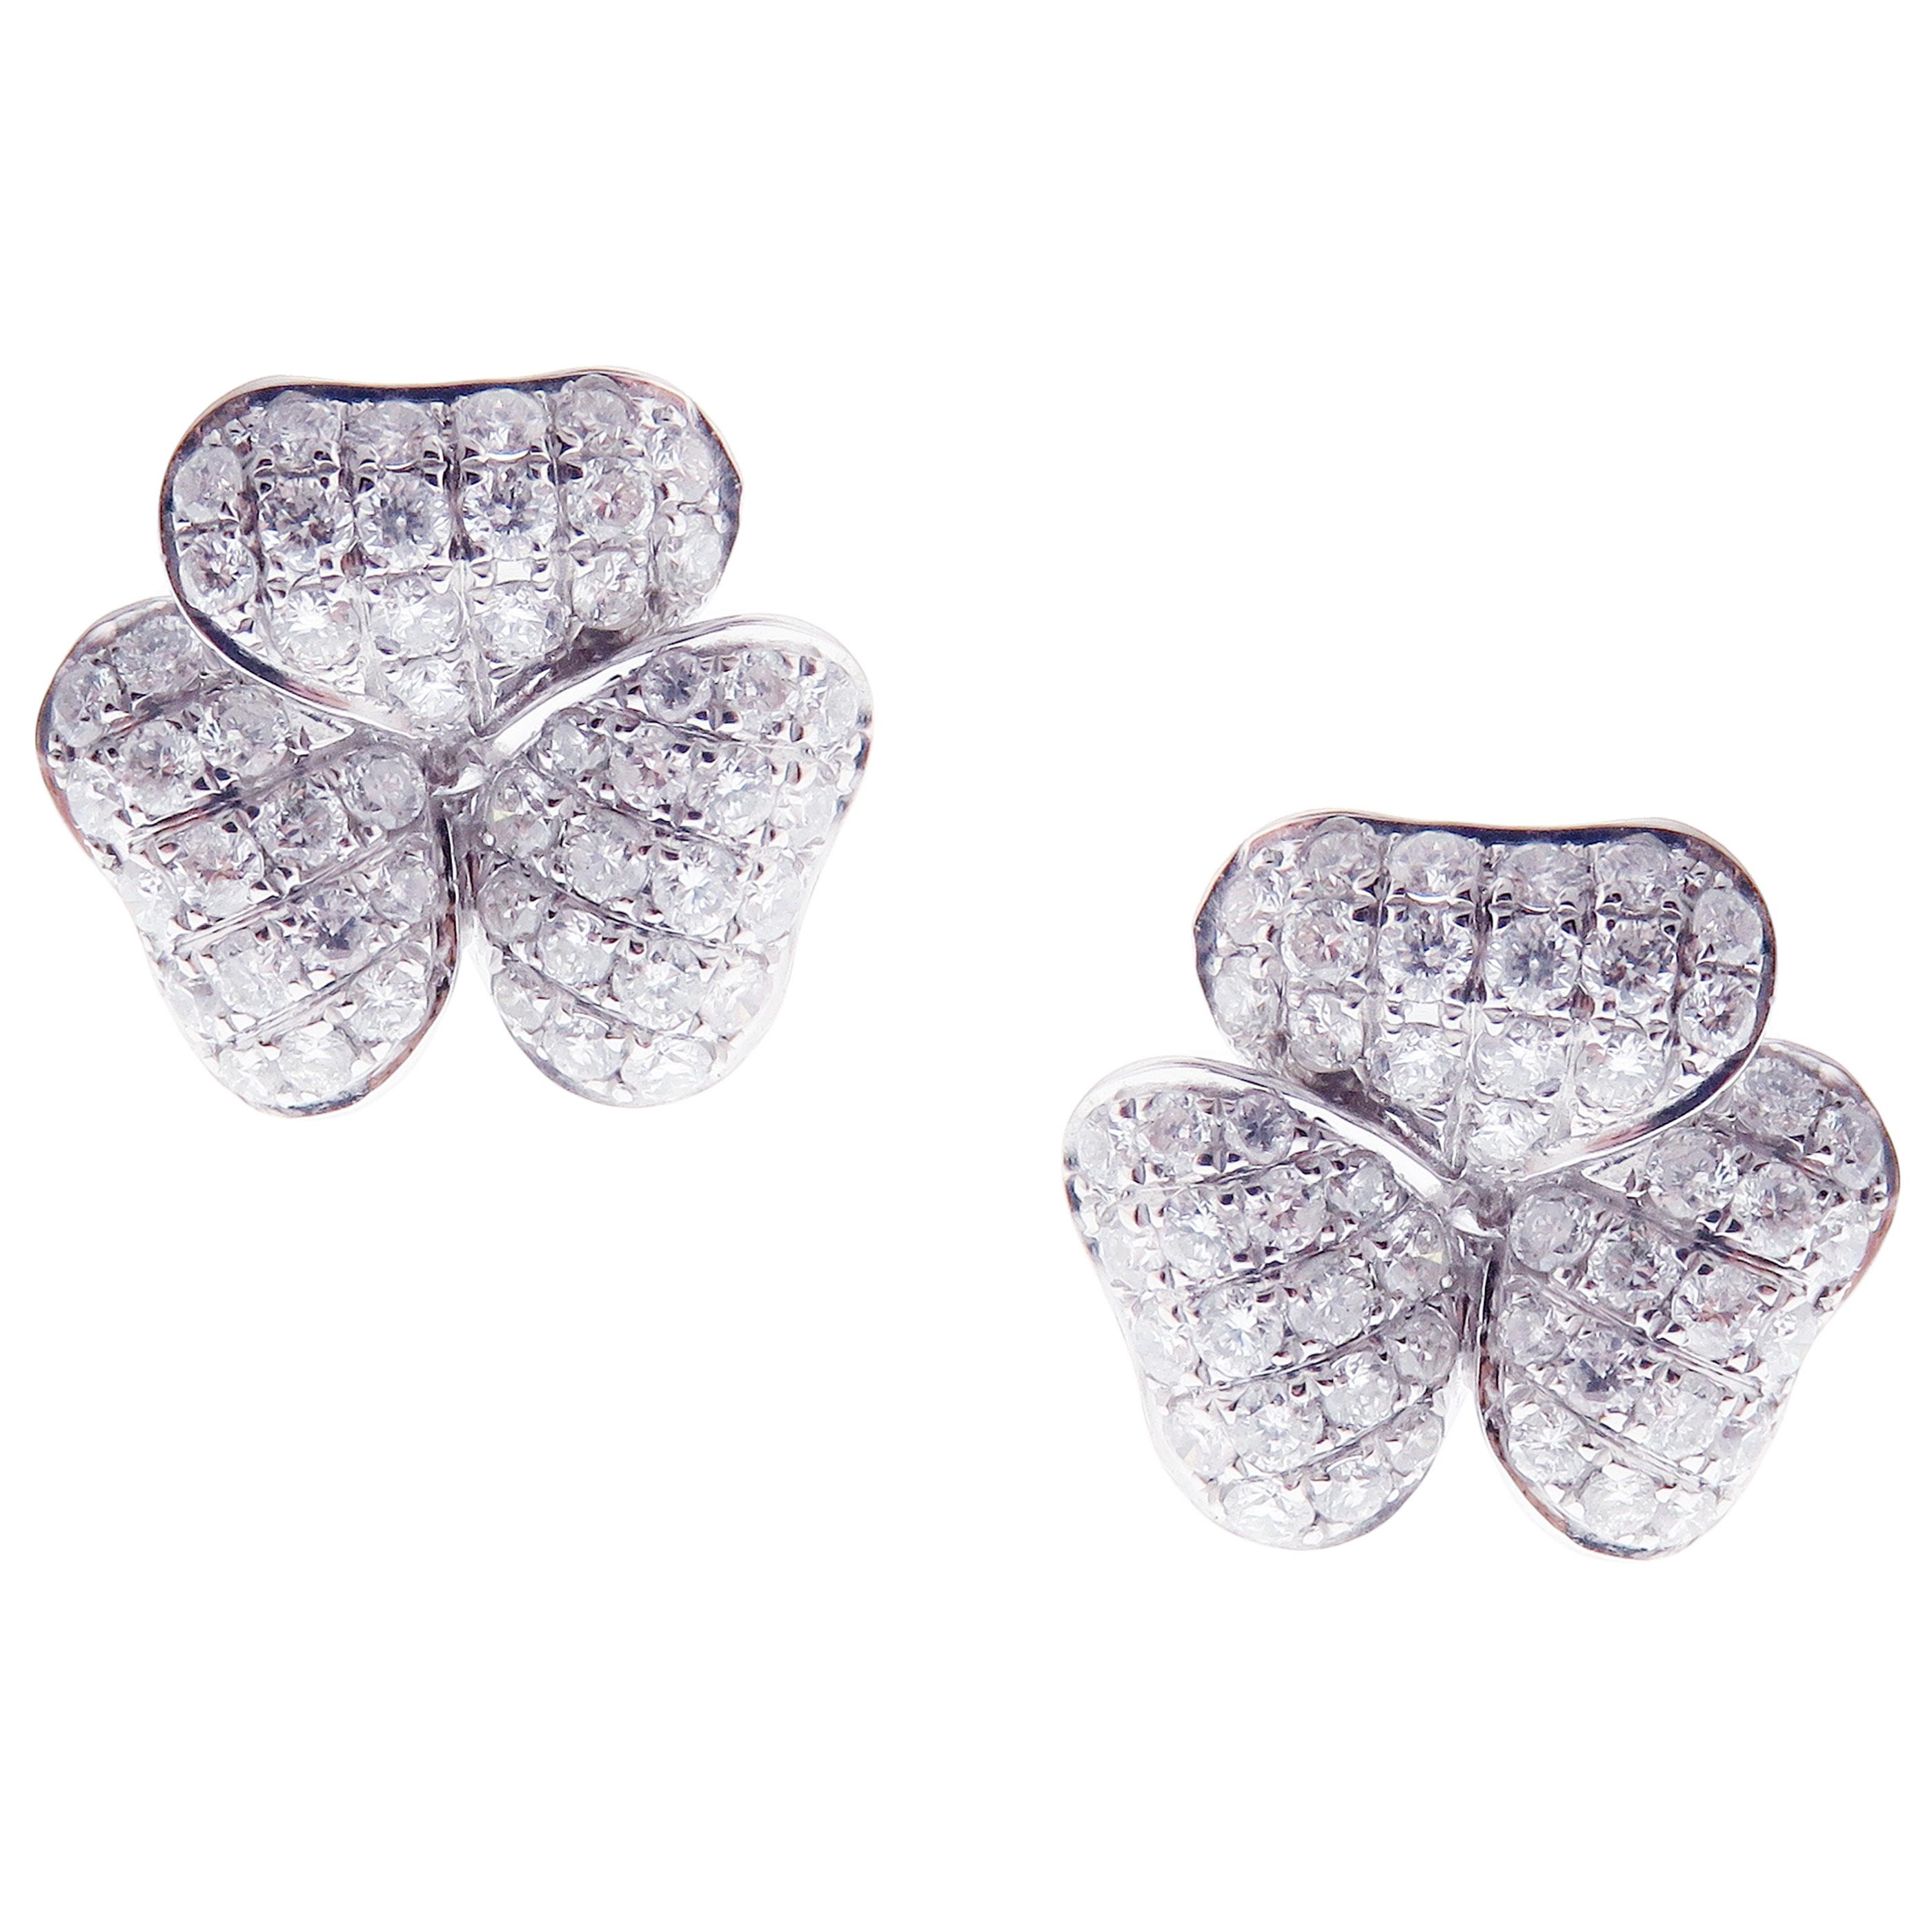 This medium diamond classic pave three petals flower earring is crafted in 18-karat white gold, featuring 102 round white diamonds totaling of 1.06 carats. 
Approximate total weight 3.90 grams.
These earrings come with push back post backings.
SI-G